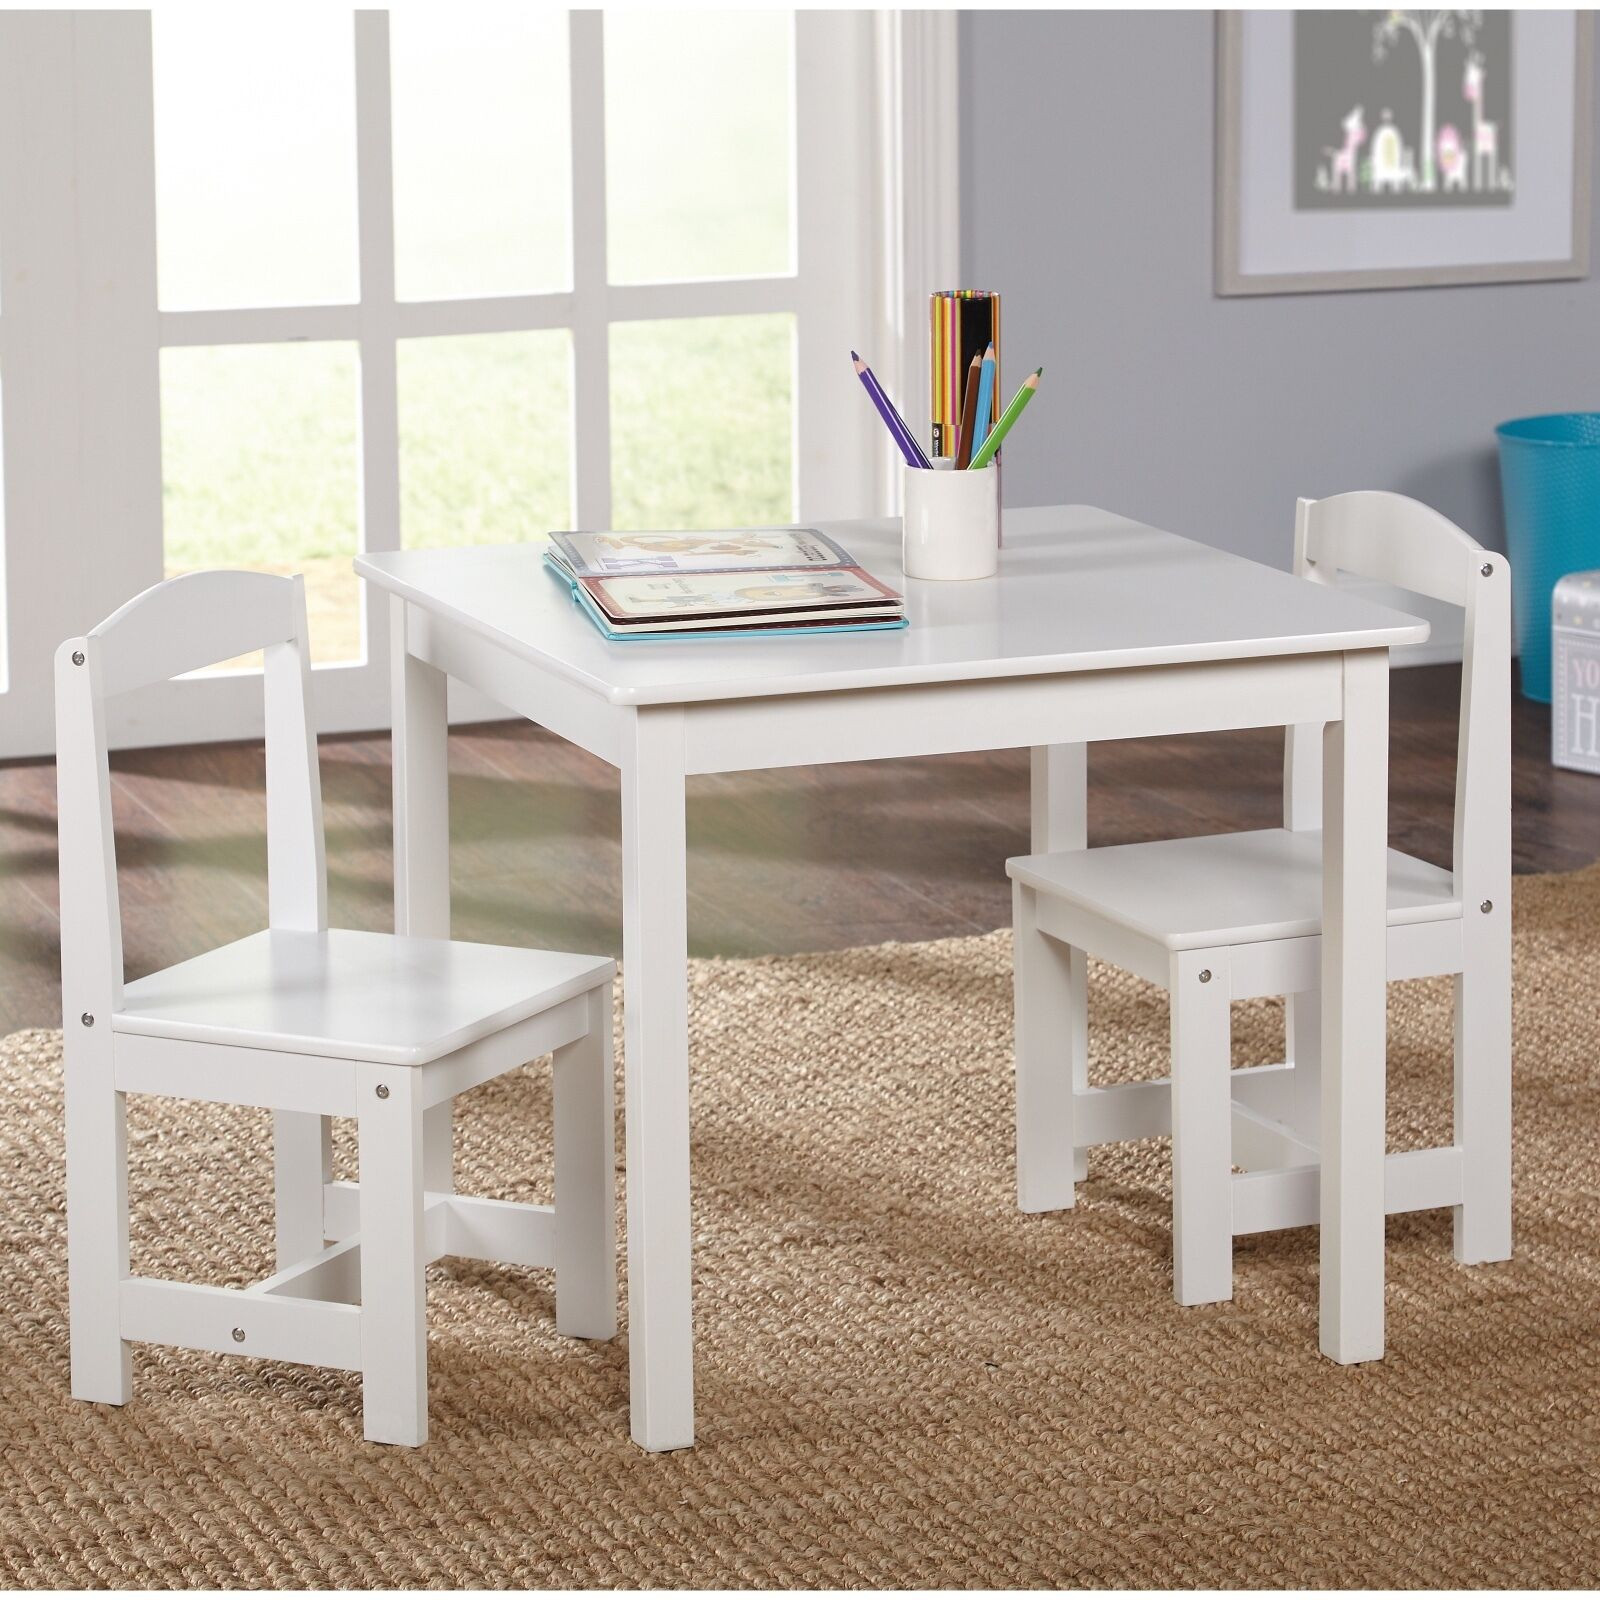 Kids Desk And Chair
 Study Small Table and Chair Set Generic 3 Piece Wood